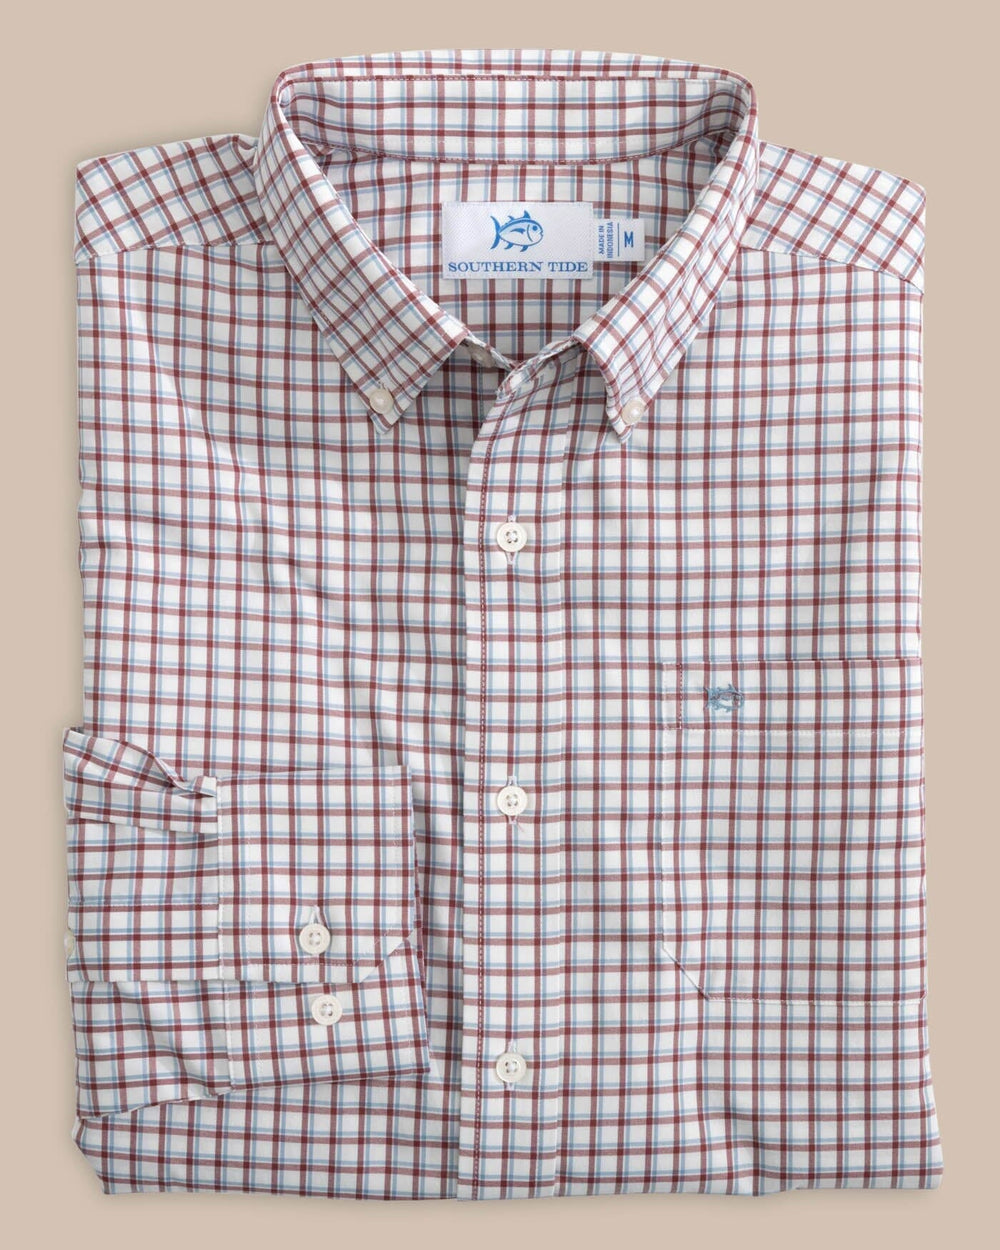 The folded view of the Southern Tide Bellevue Plaid Sport Shirt by Southern Tide - Tuscany Red